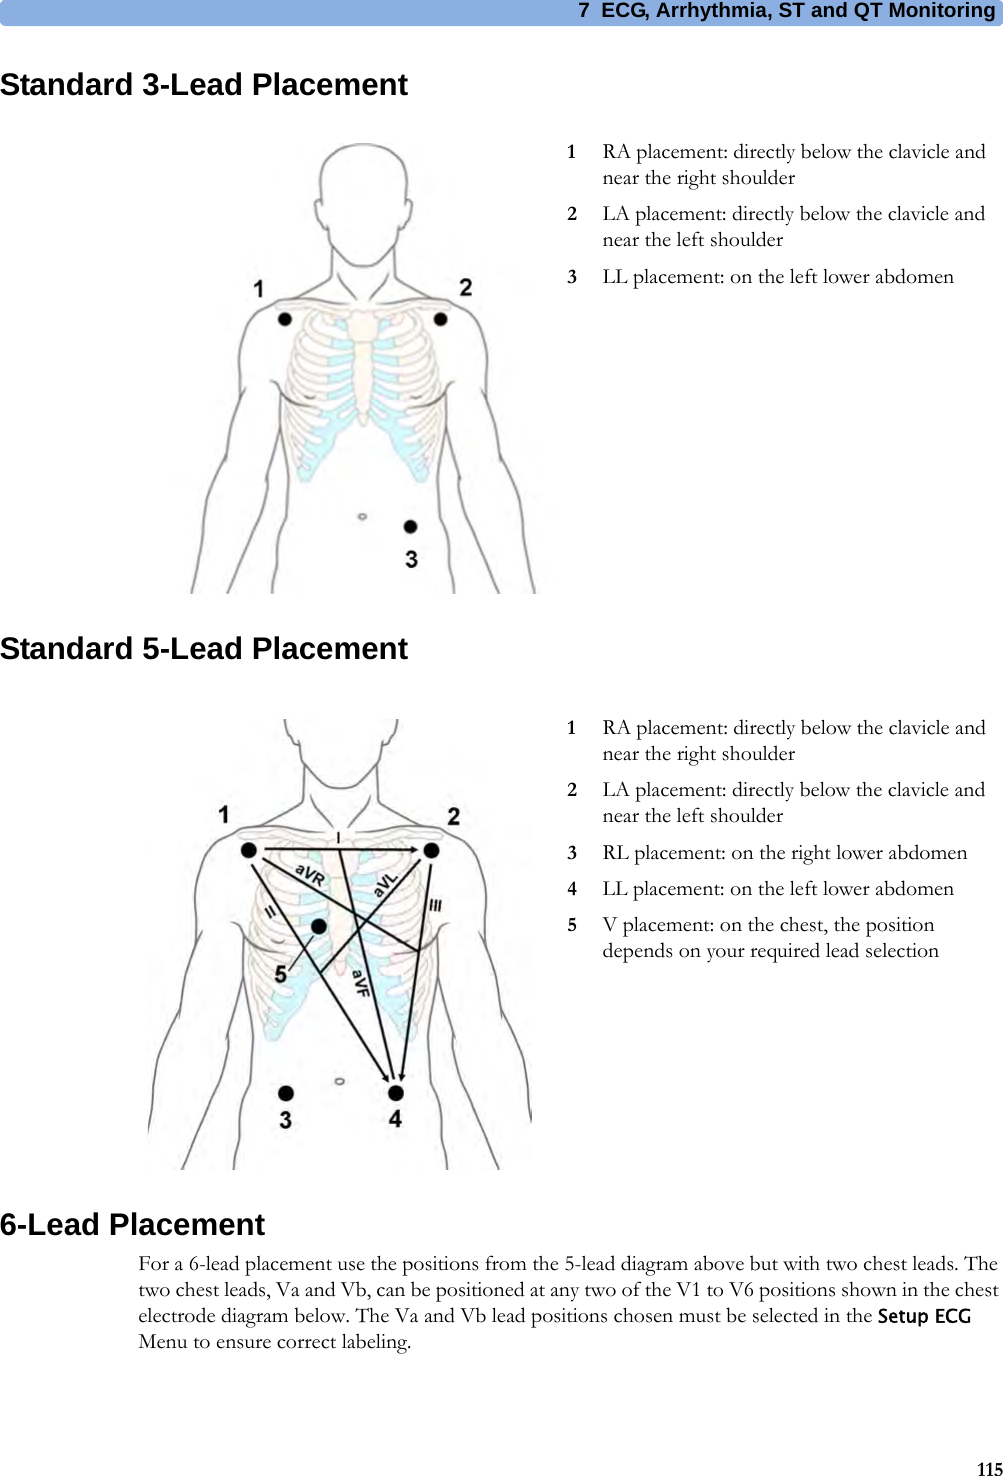 7 ECG, Arrhythmia, ST and QT Monitoring115Standard 3-Lead PlacementStandard 5-Lead Placement6-Lead PlacementFor a 6-lead placement use the positions from the 5-lead diagram above but with two chest leads. The two chest leads, Va and Vb, can be positioned at any two of the V1 to V6 positions shown in the chest electrode diagram below. The Va and Vb lead positions chosen must be selected in the Setup ECG Menu to ensure correct labeling.1RA placement: directly below the clavicle and near the right shoulder2LA placement: directly below the clavicle and near the left shoulder3LL placement: on the left lower abdomen1RA placement: directly below the clavicle and near the right shoulder2LA placement: directly below the clavicle and near the left shoulder3RL placement: on the right lower abdomen4LL placement: on the left lower abdomen5V placement: on the chest, the position depends on your required lead selection